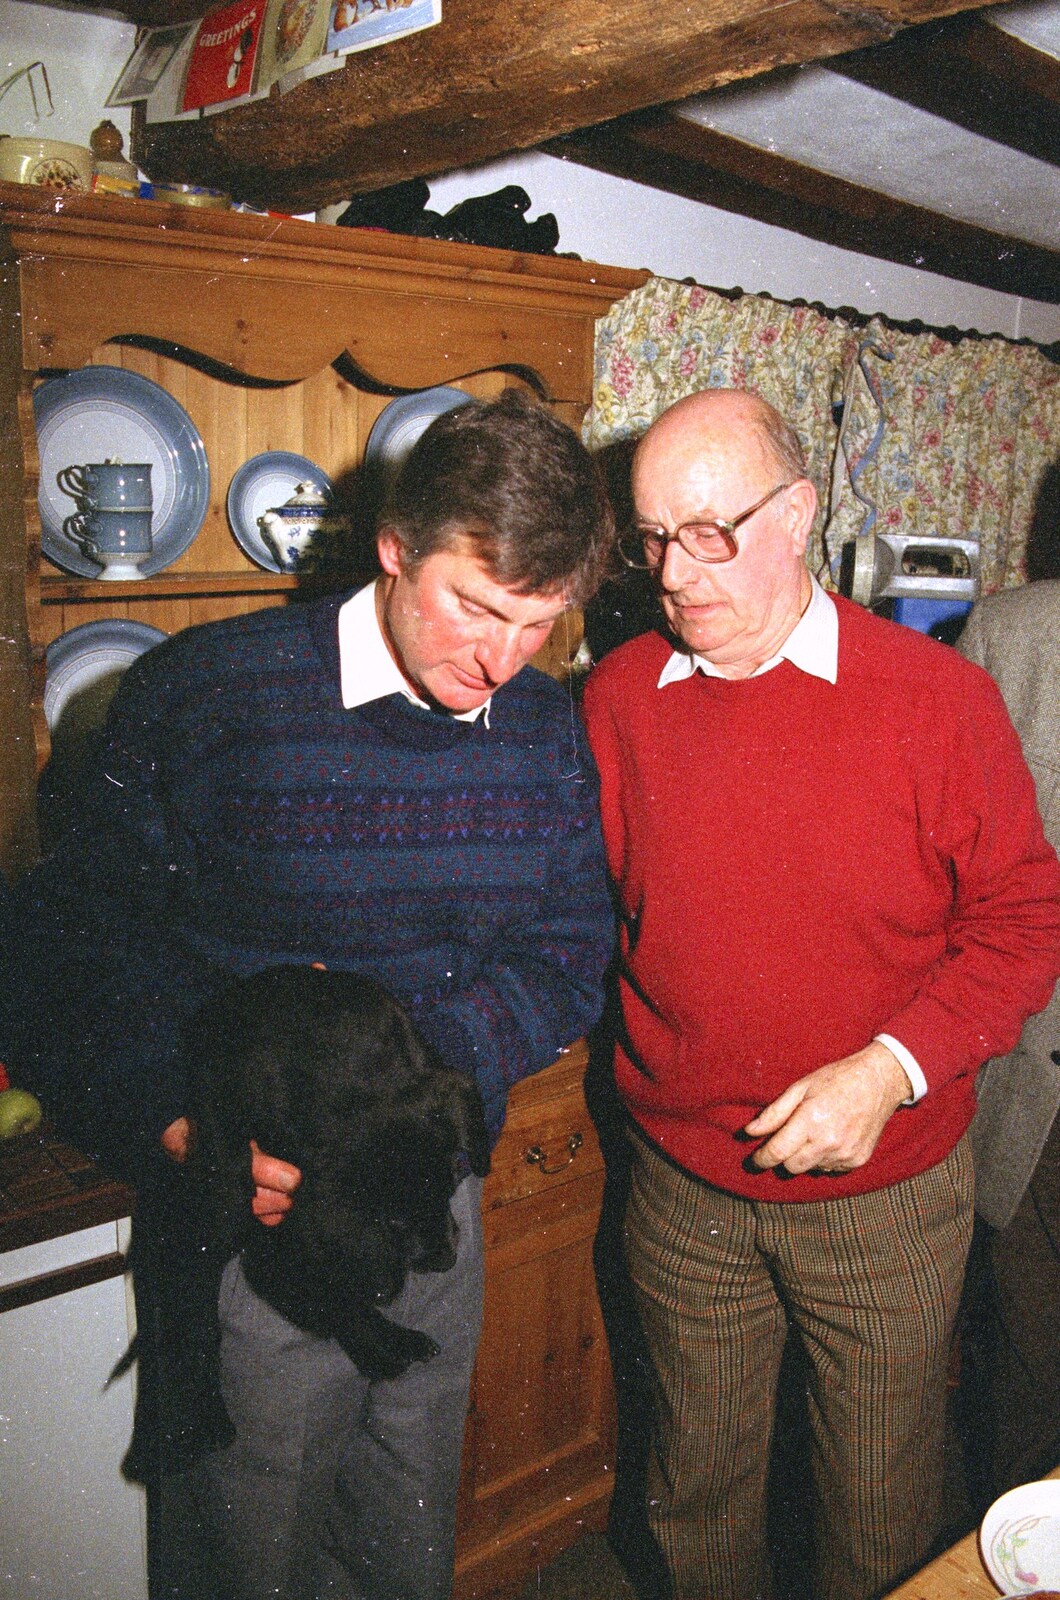 Geoff gets a go of the new puppy from Christmas in Devon and Stuston - 25th December 1991